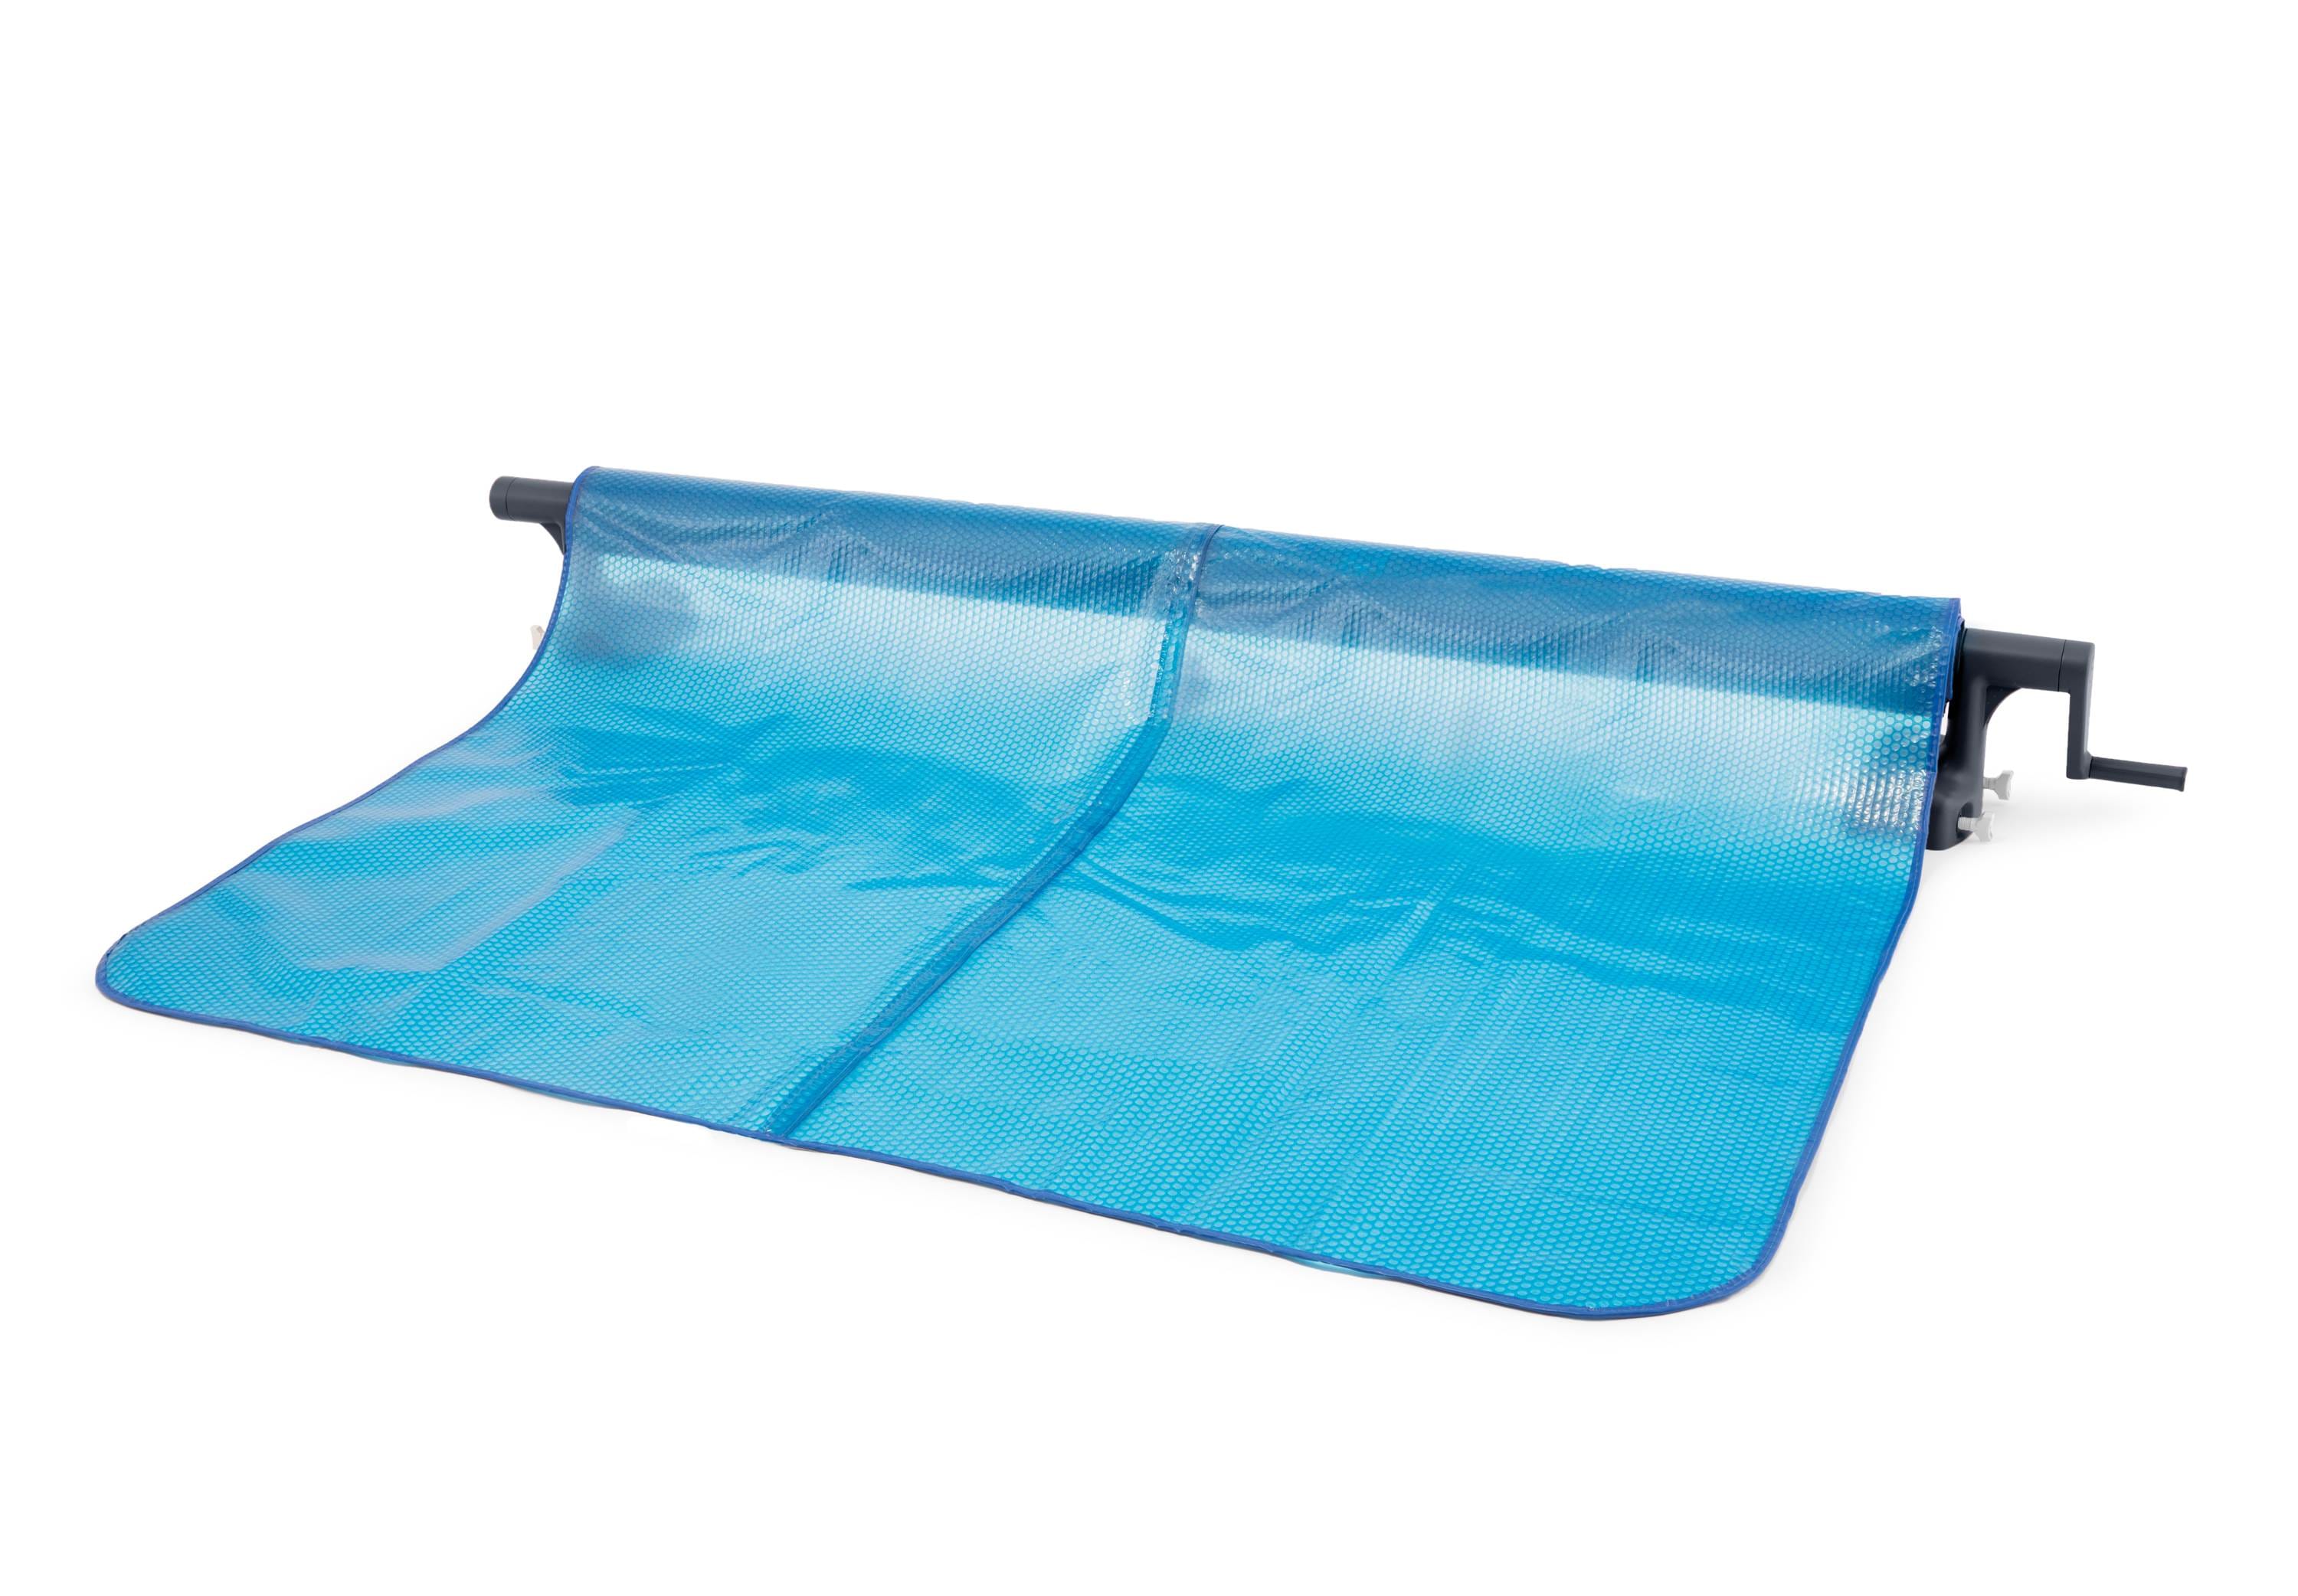 Winado 14-ft Mountable Solar Pool Cover Reel in the Pool Cover